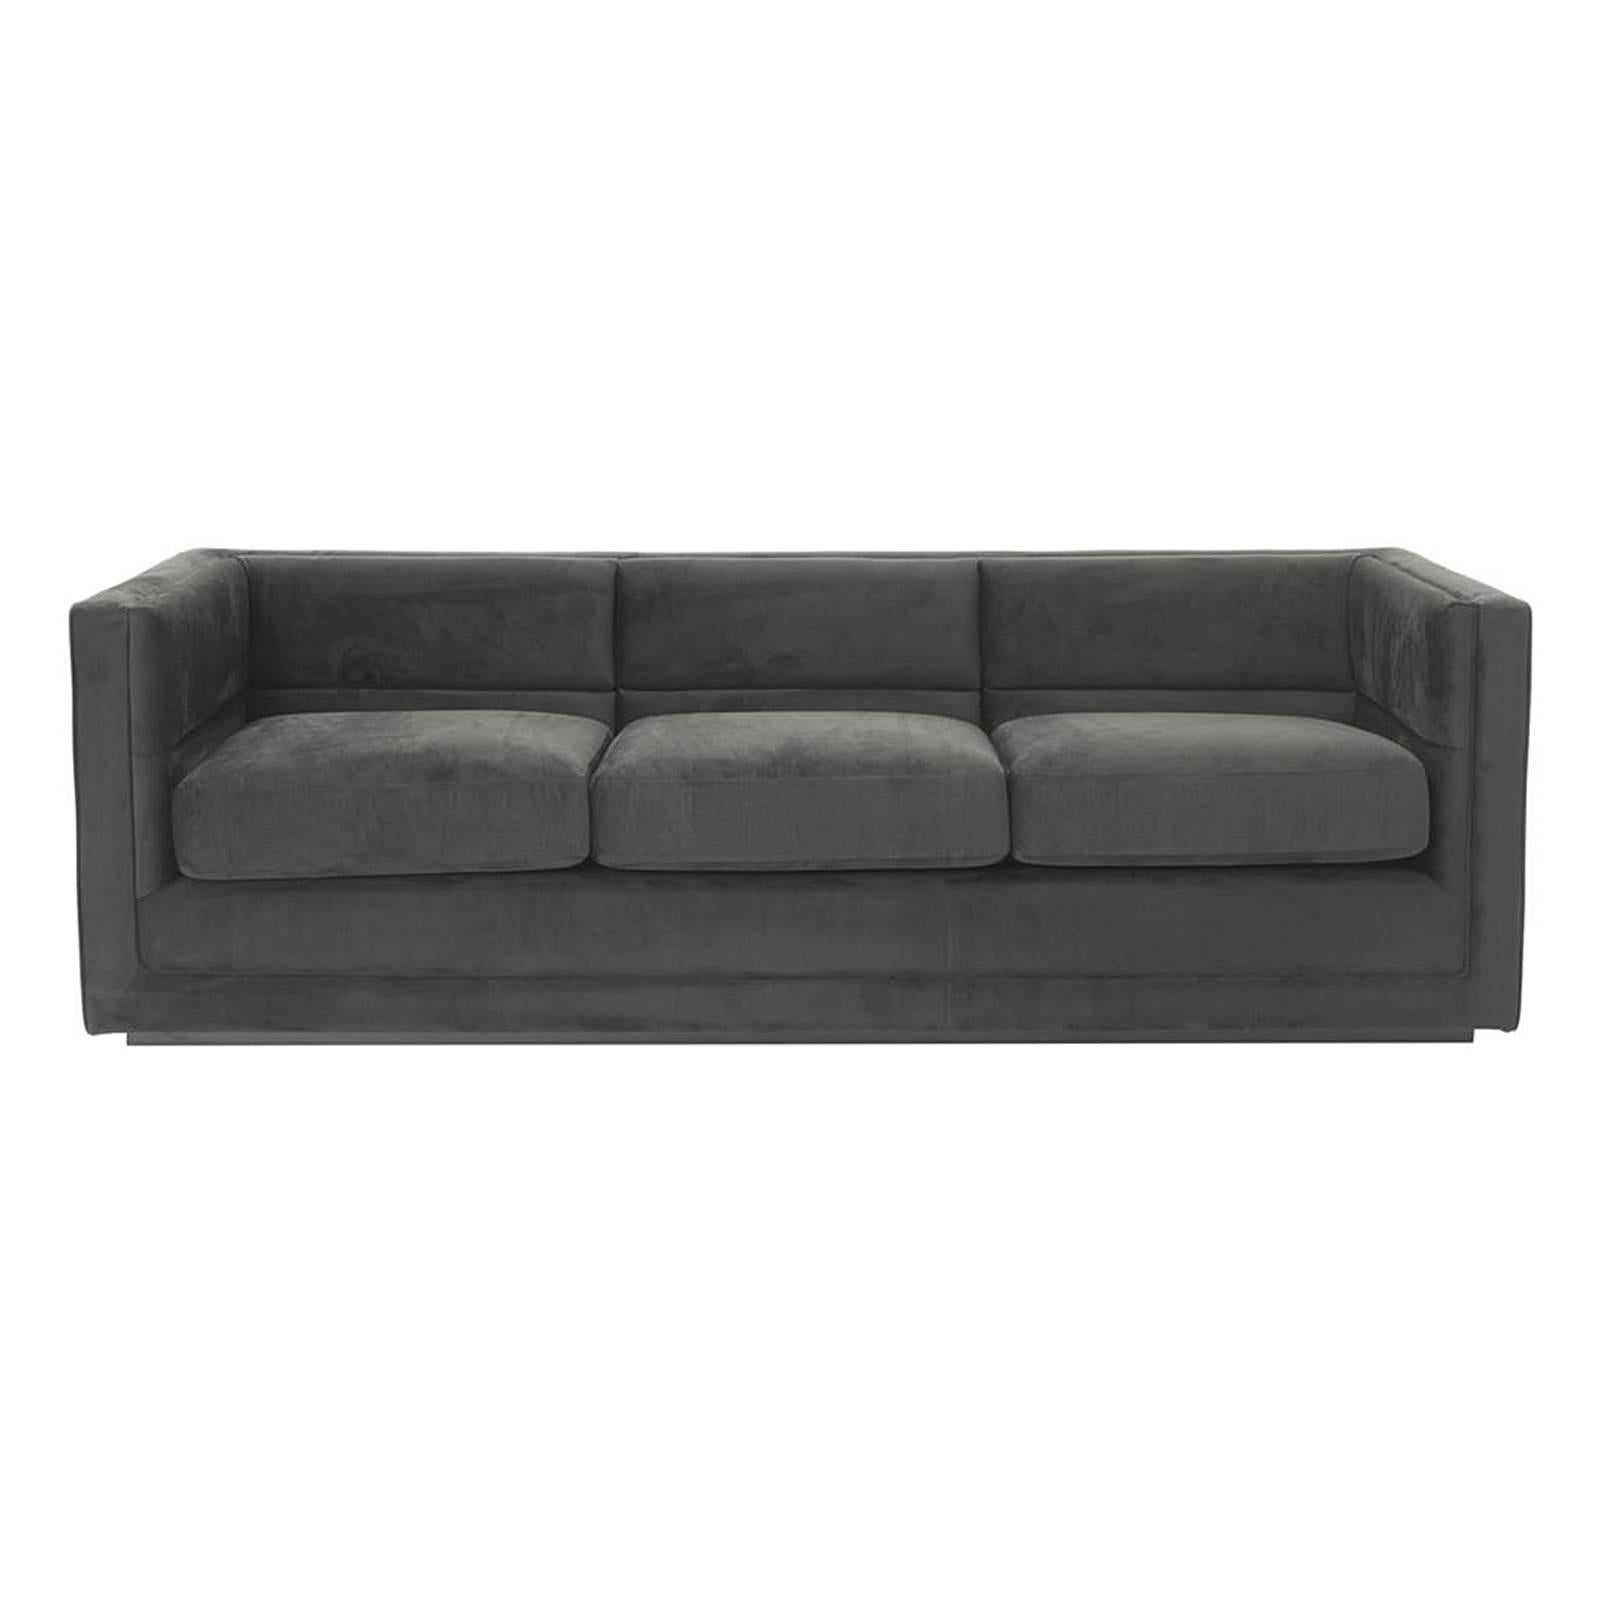 Sofa becker with structure in solid wood.
Upholstered with anthracite grey fabric.
Fire retardant treatment. Also available with
pebble grey fabric. Also available in armchair
Becker.
